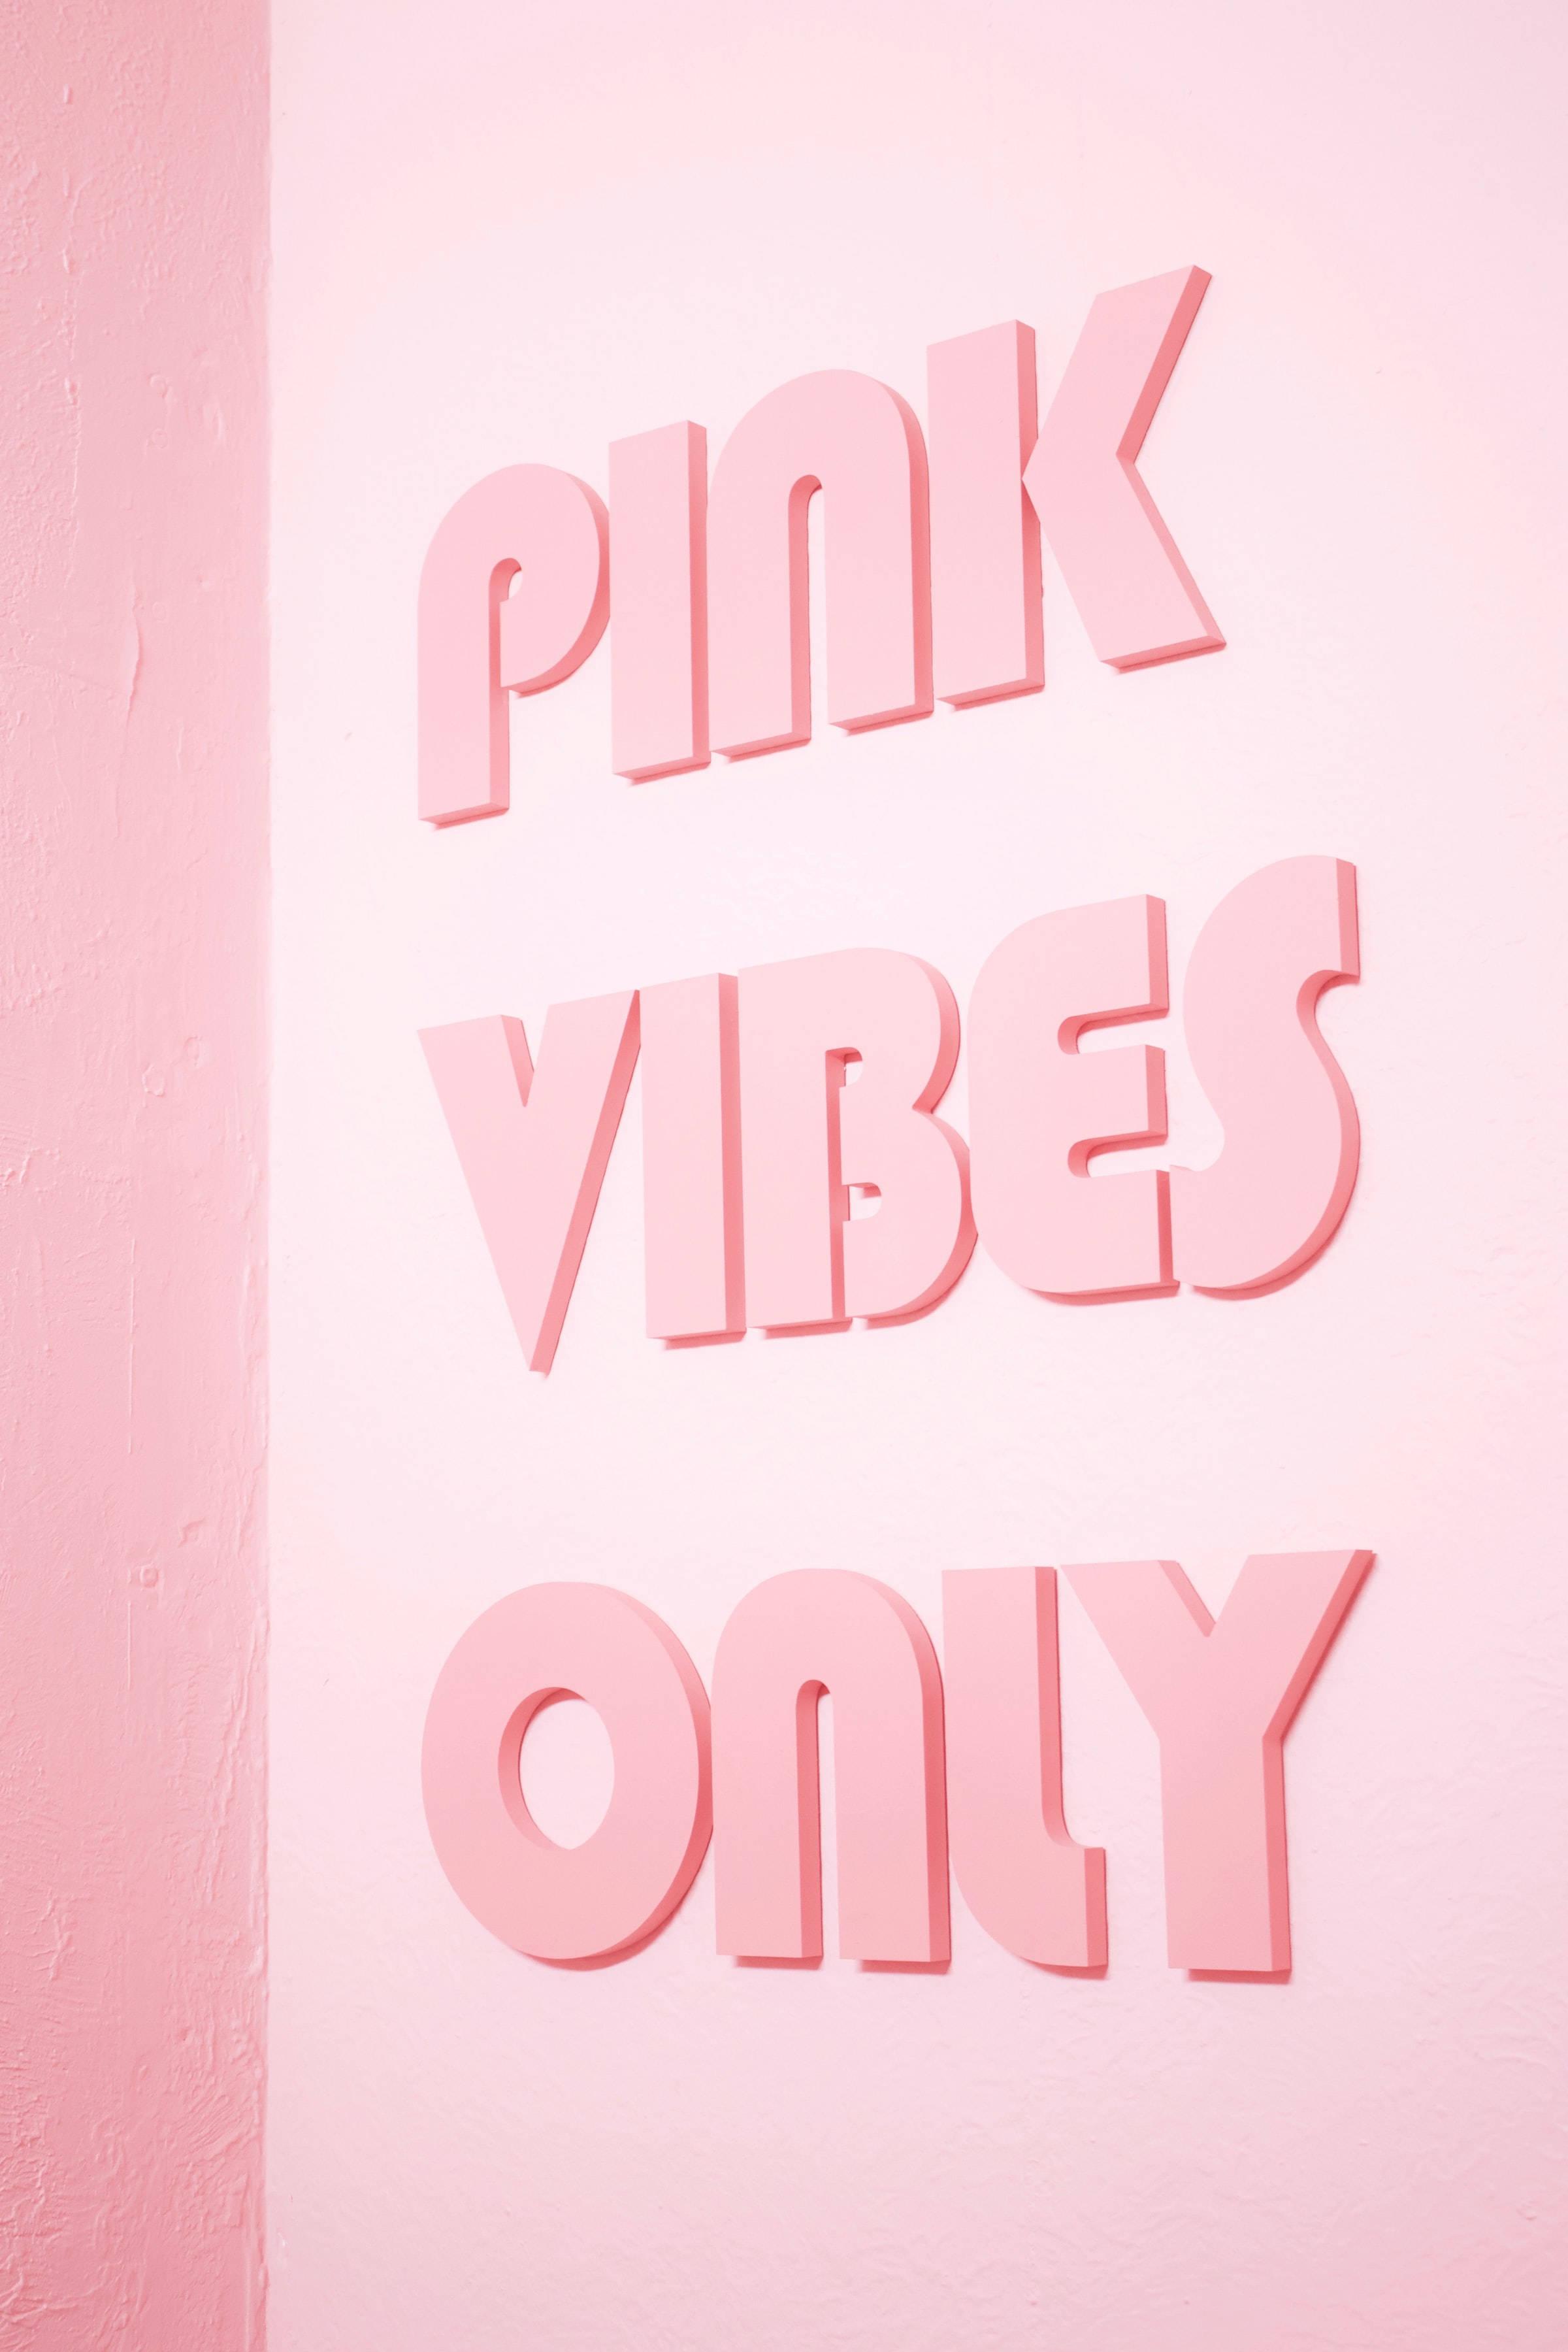 Cute Pink Aesthetic Pictures Wallpaper